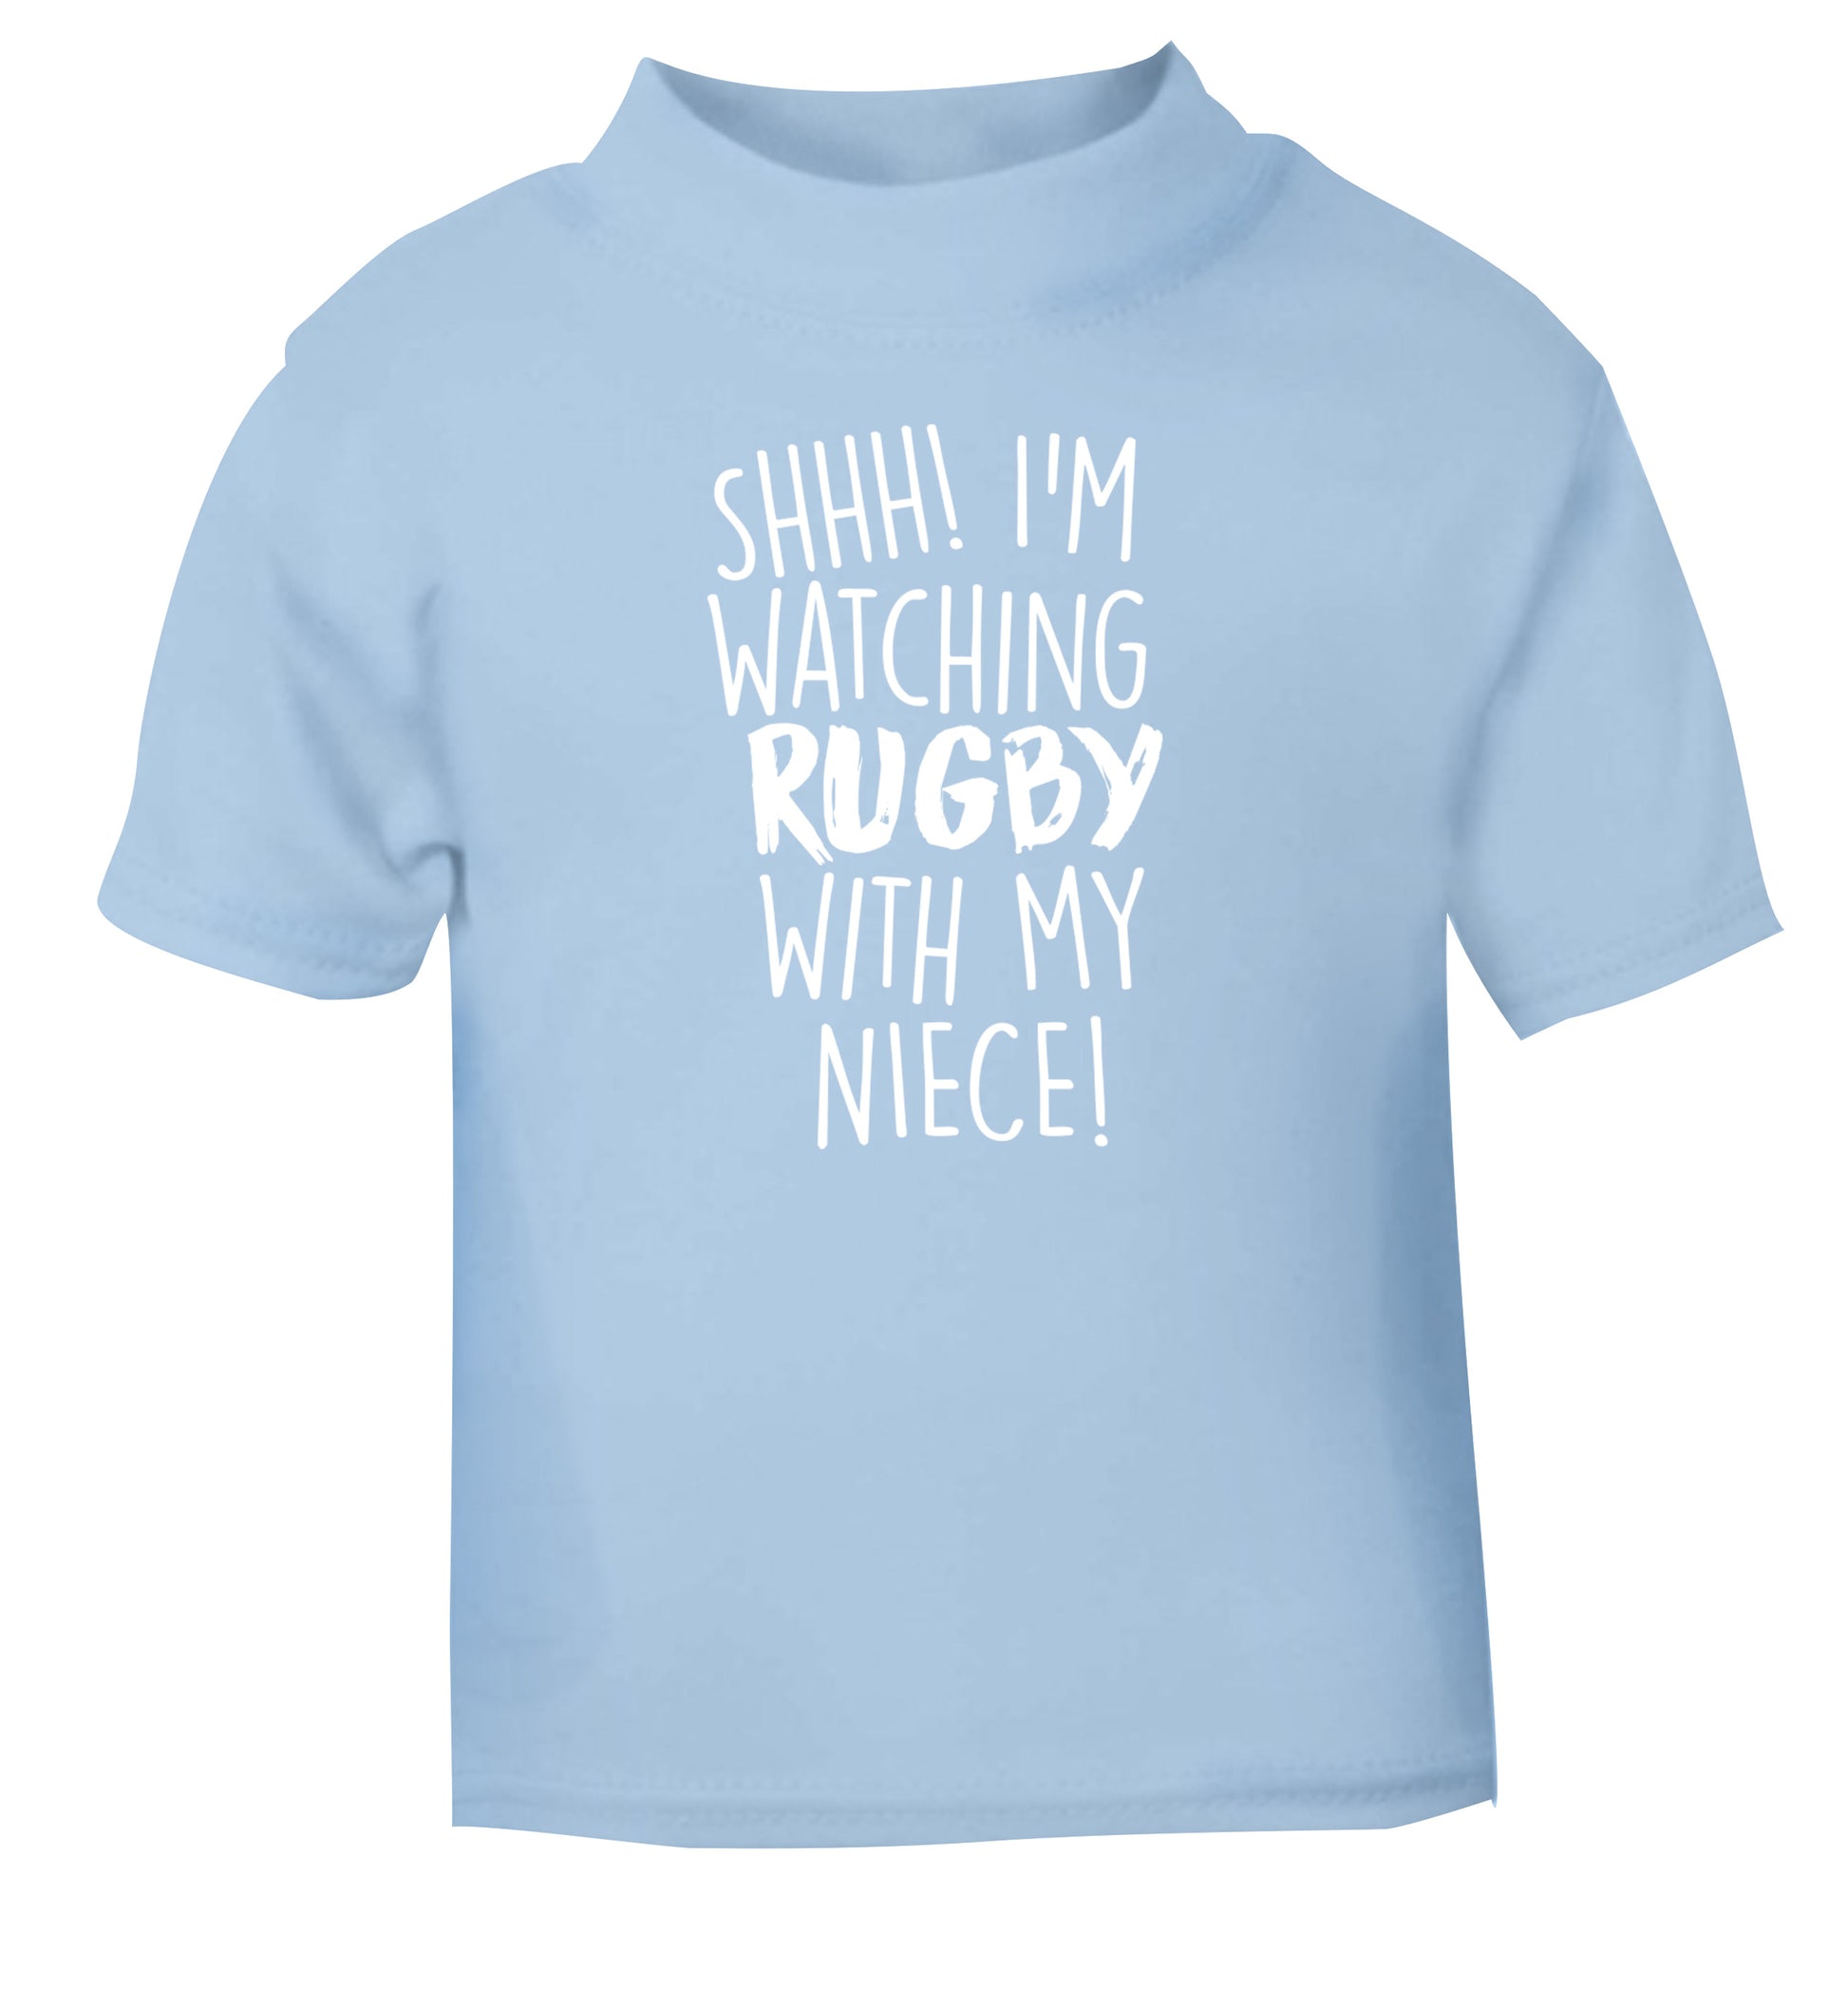 Shh.. I'm watching rugby with my niece light blue Baby Toddler Tshirt 2 Years